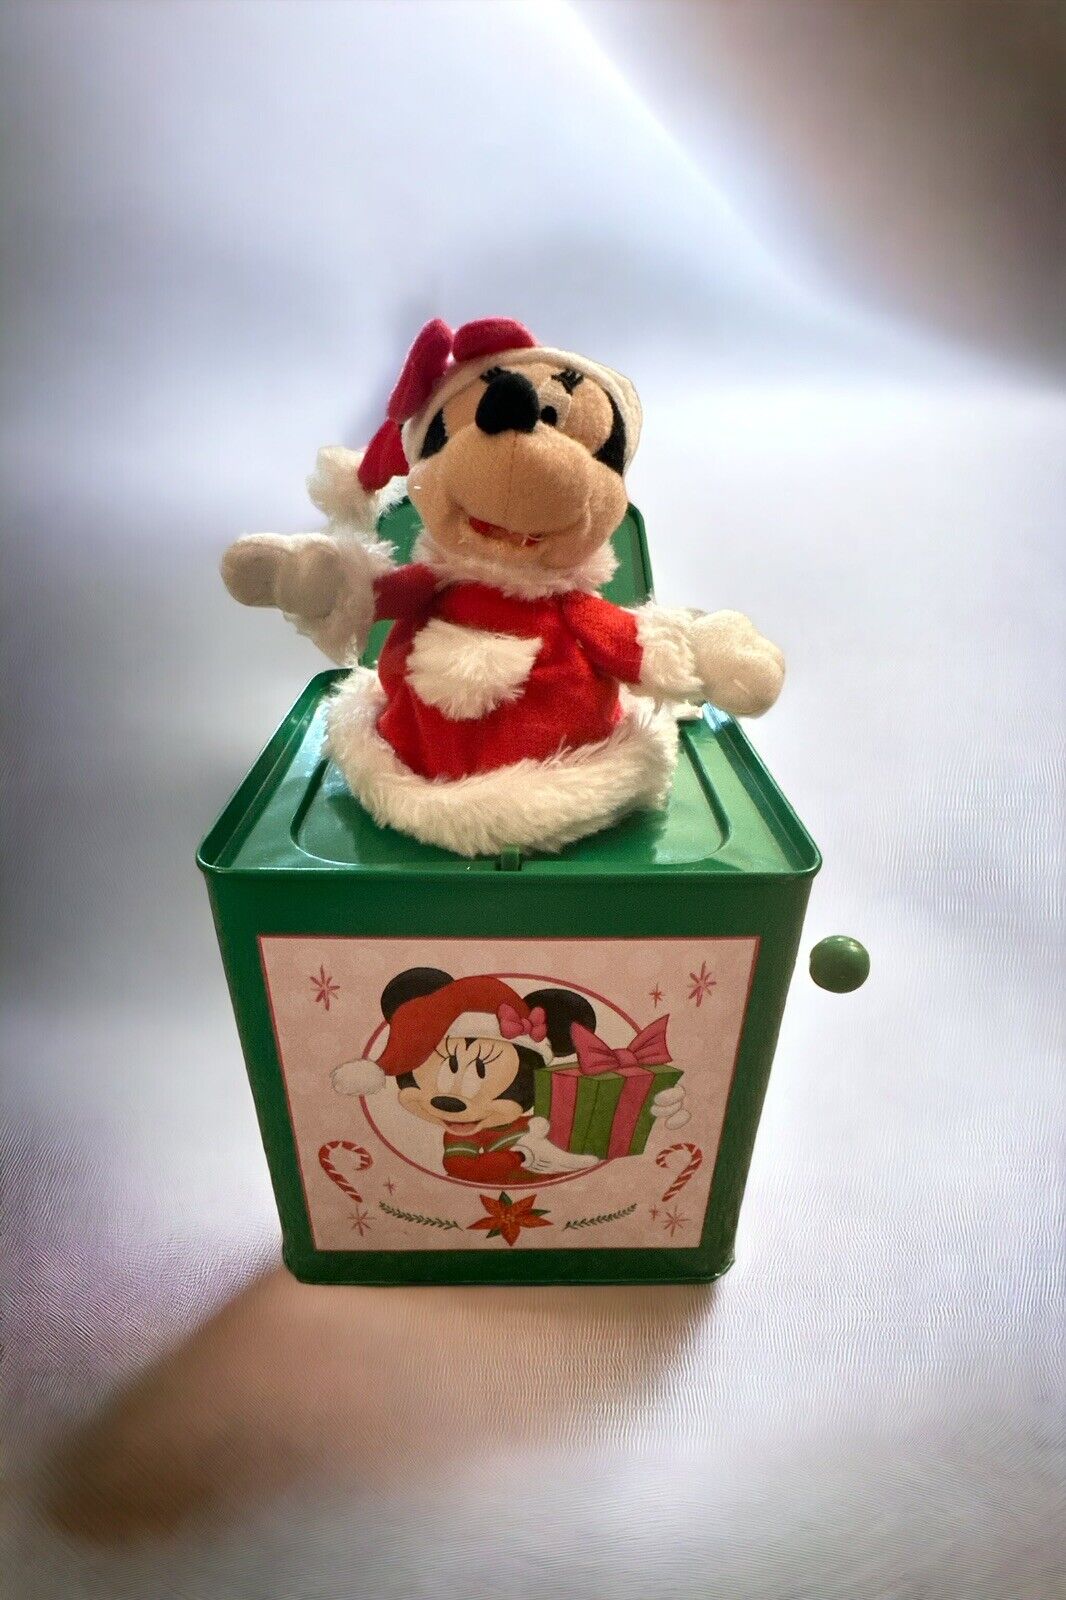 Disney Minnie Mouse Jack-in-the-Box Christmas Deck the Halls 2018 Gemmy 